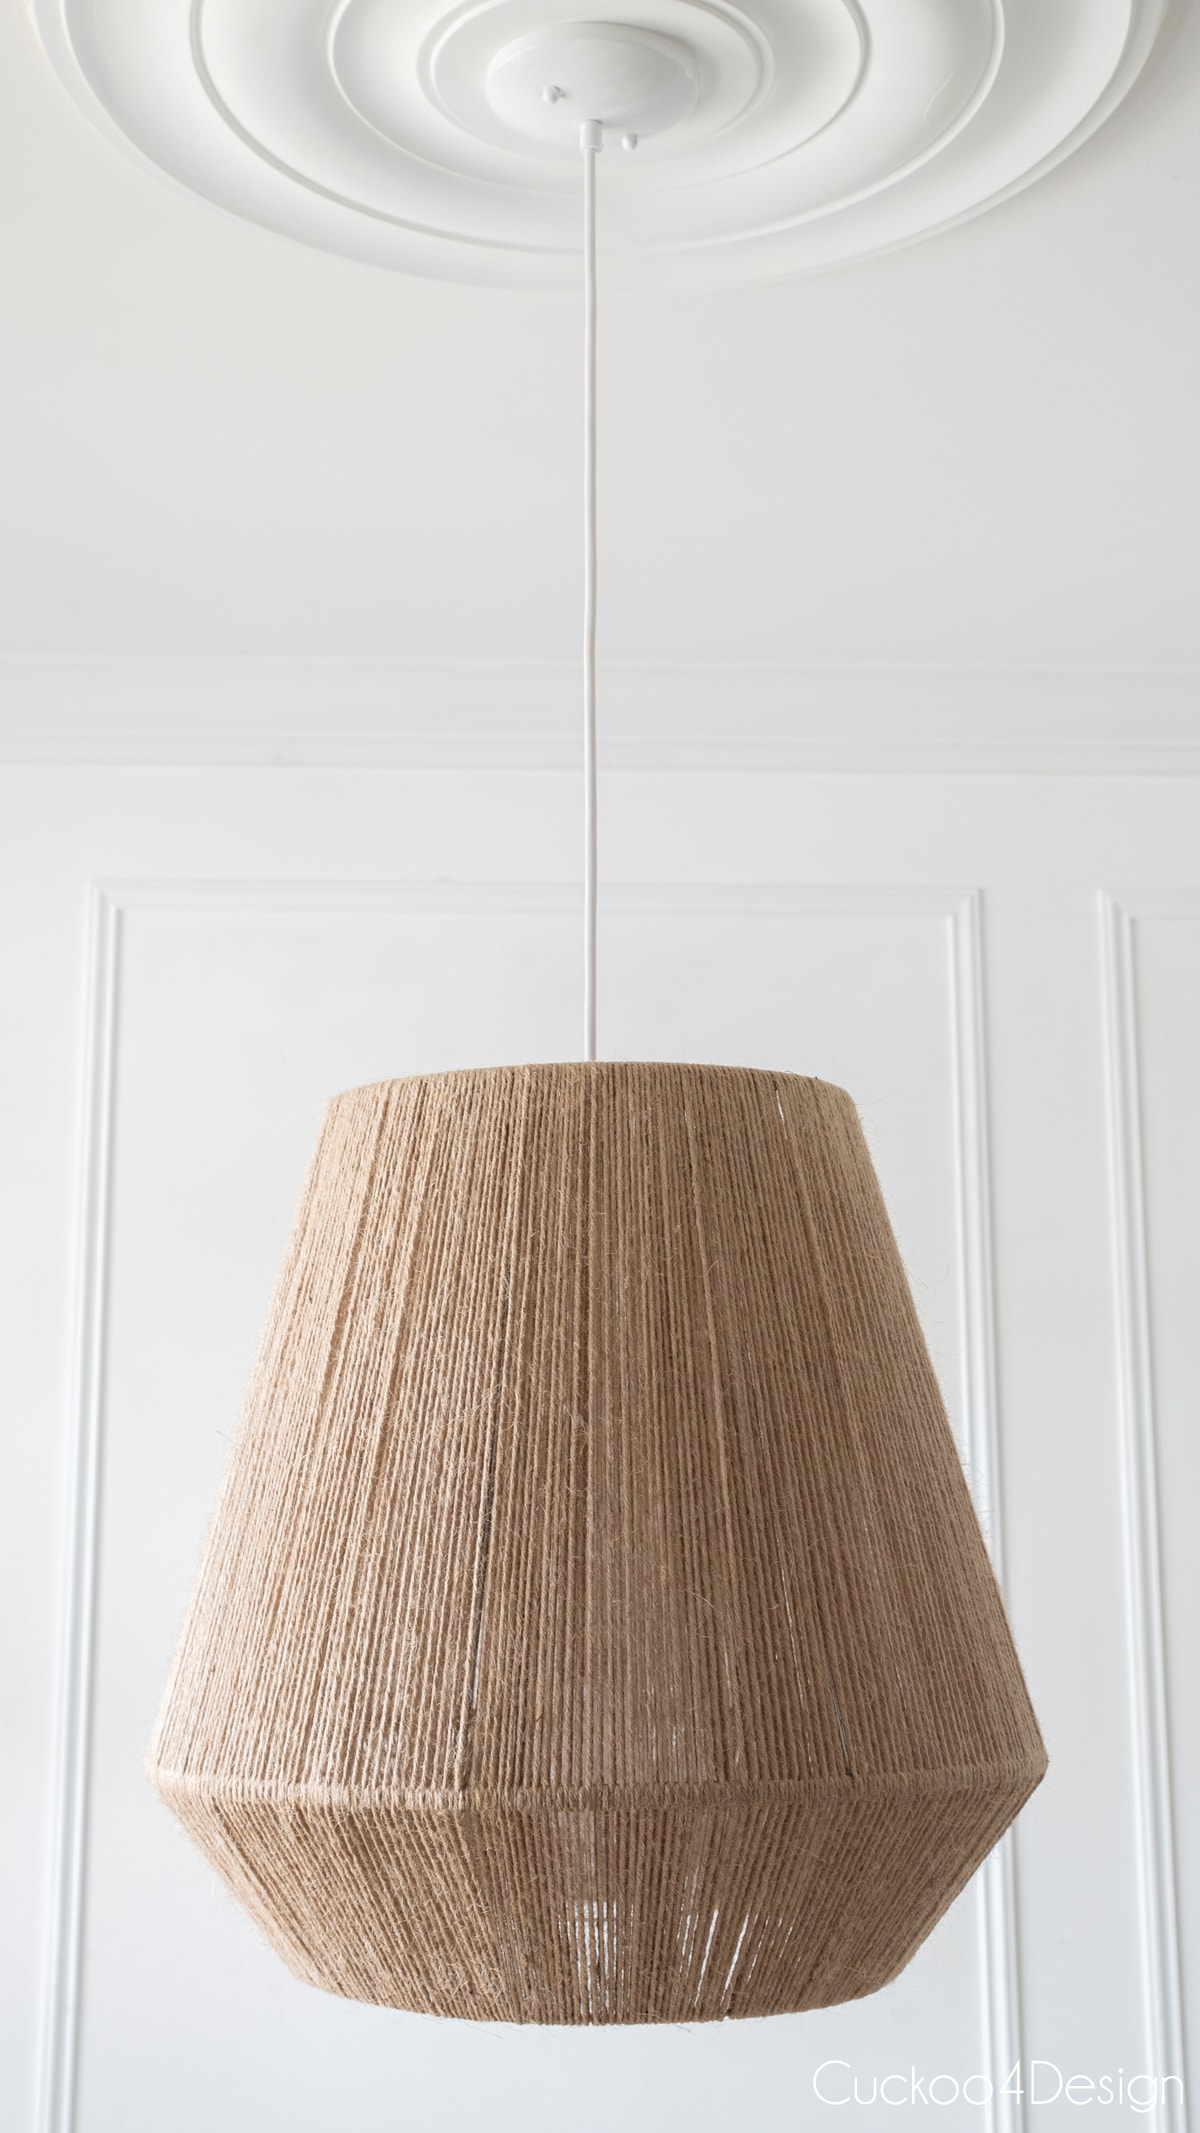 plain white background behind jute pendant light with lights off